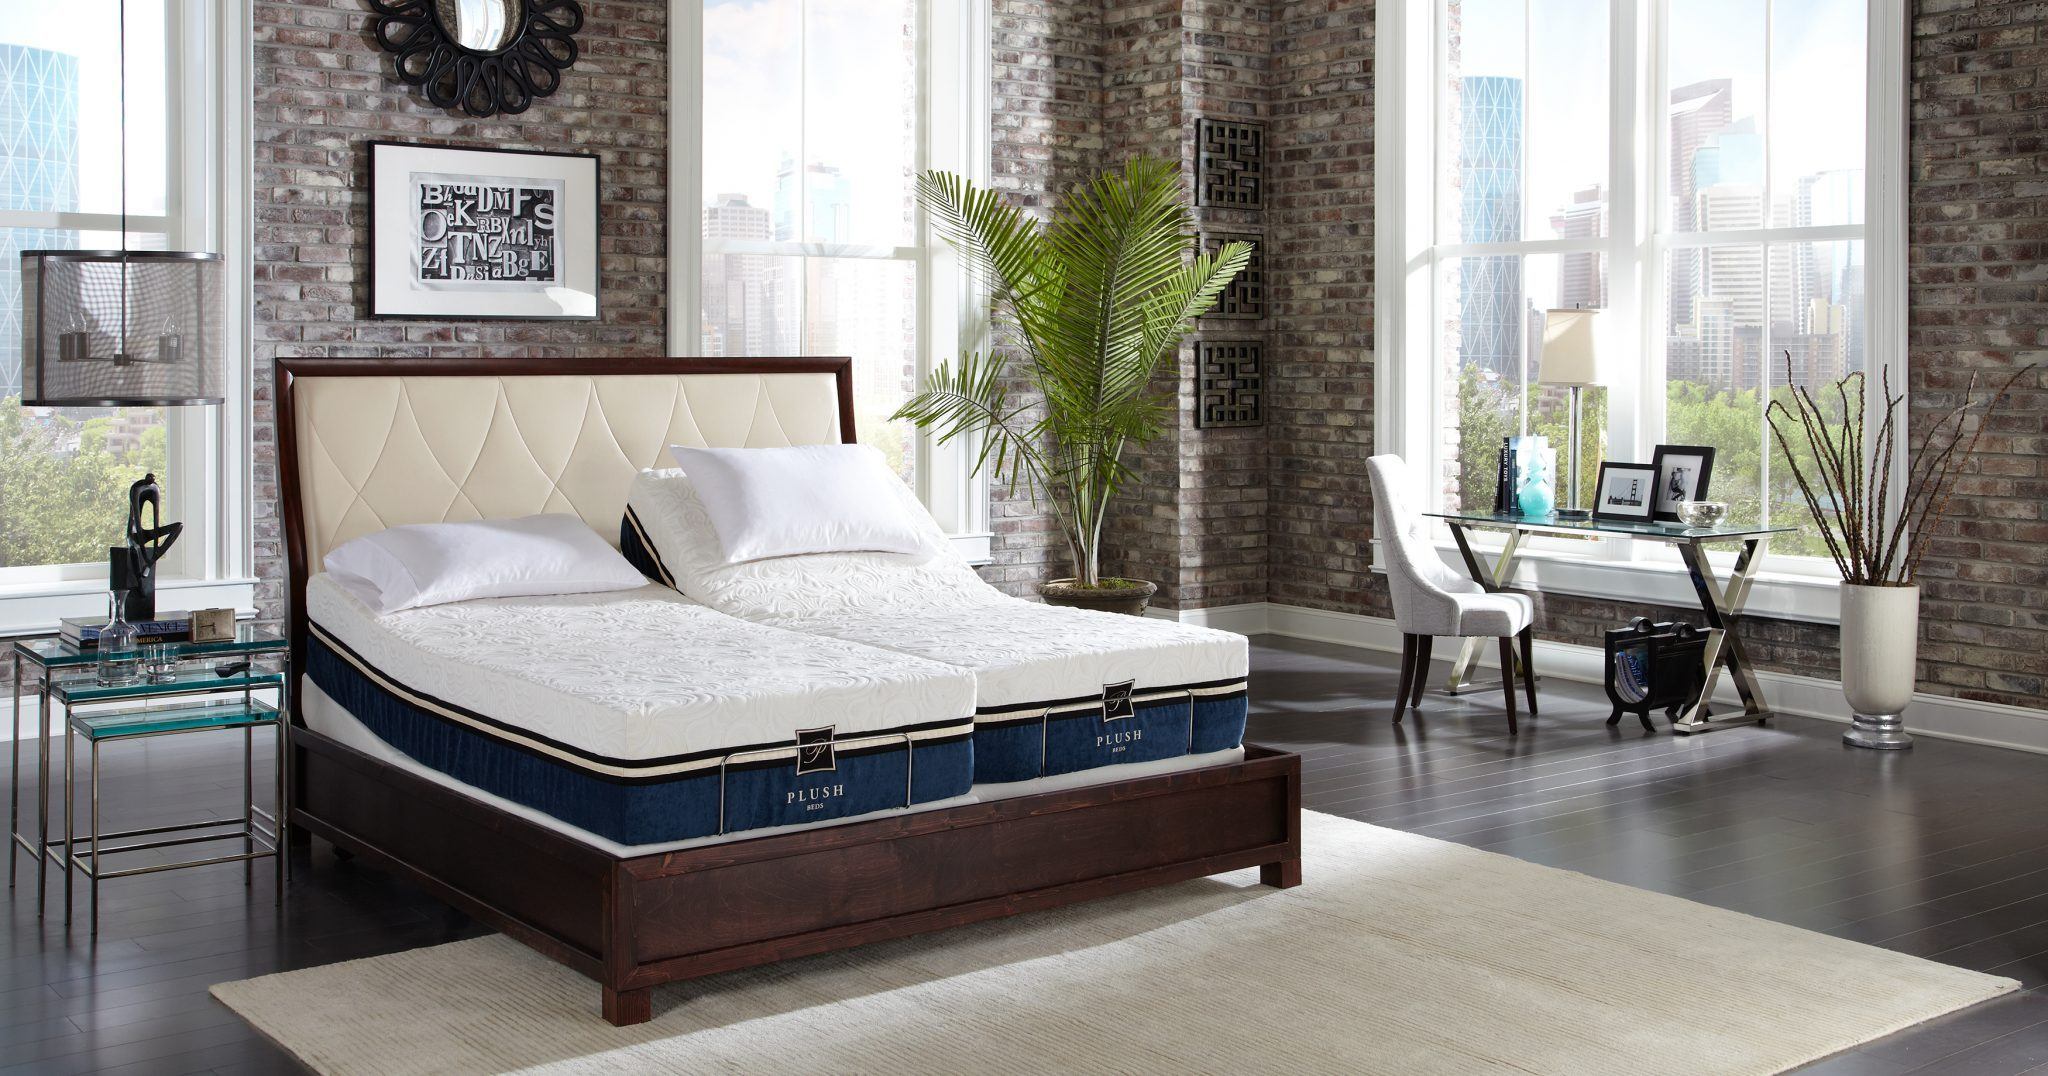 Adjustable Bed Bedding - What You Need To Know